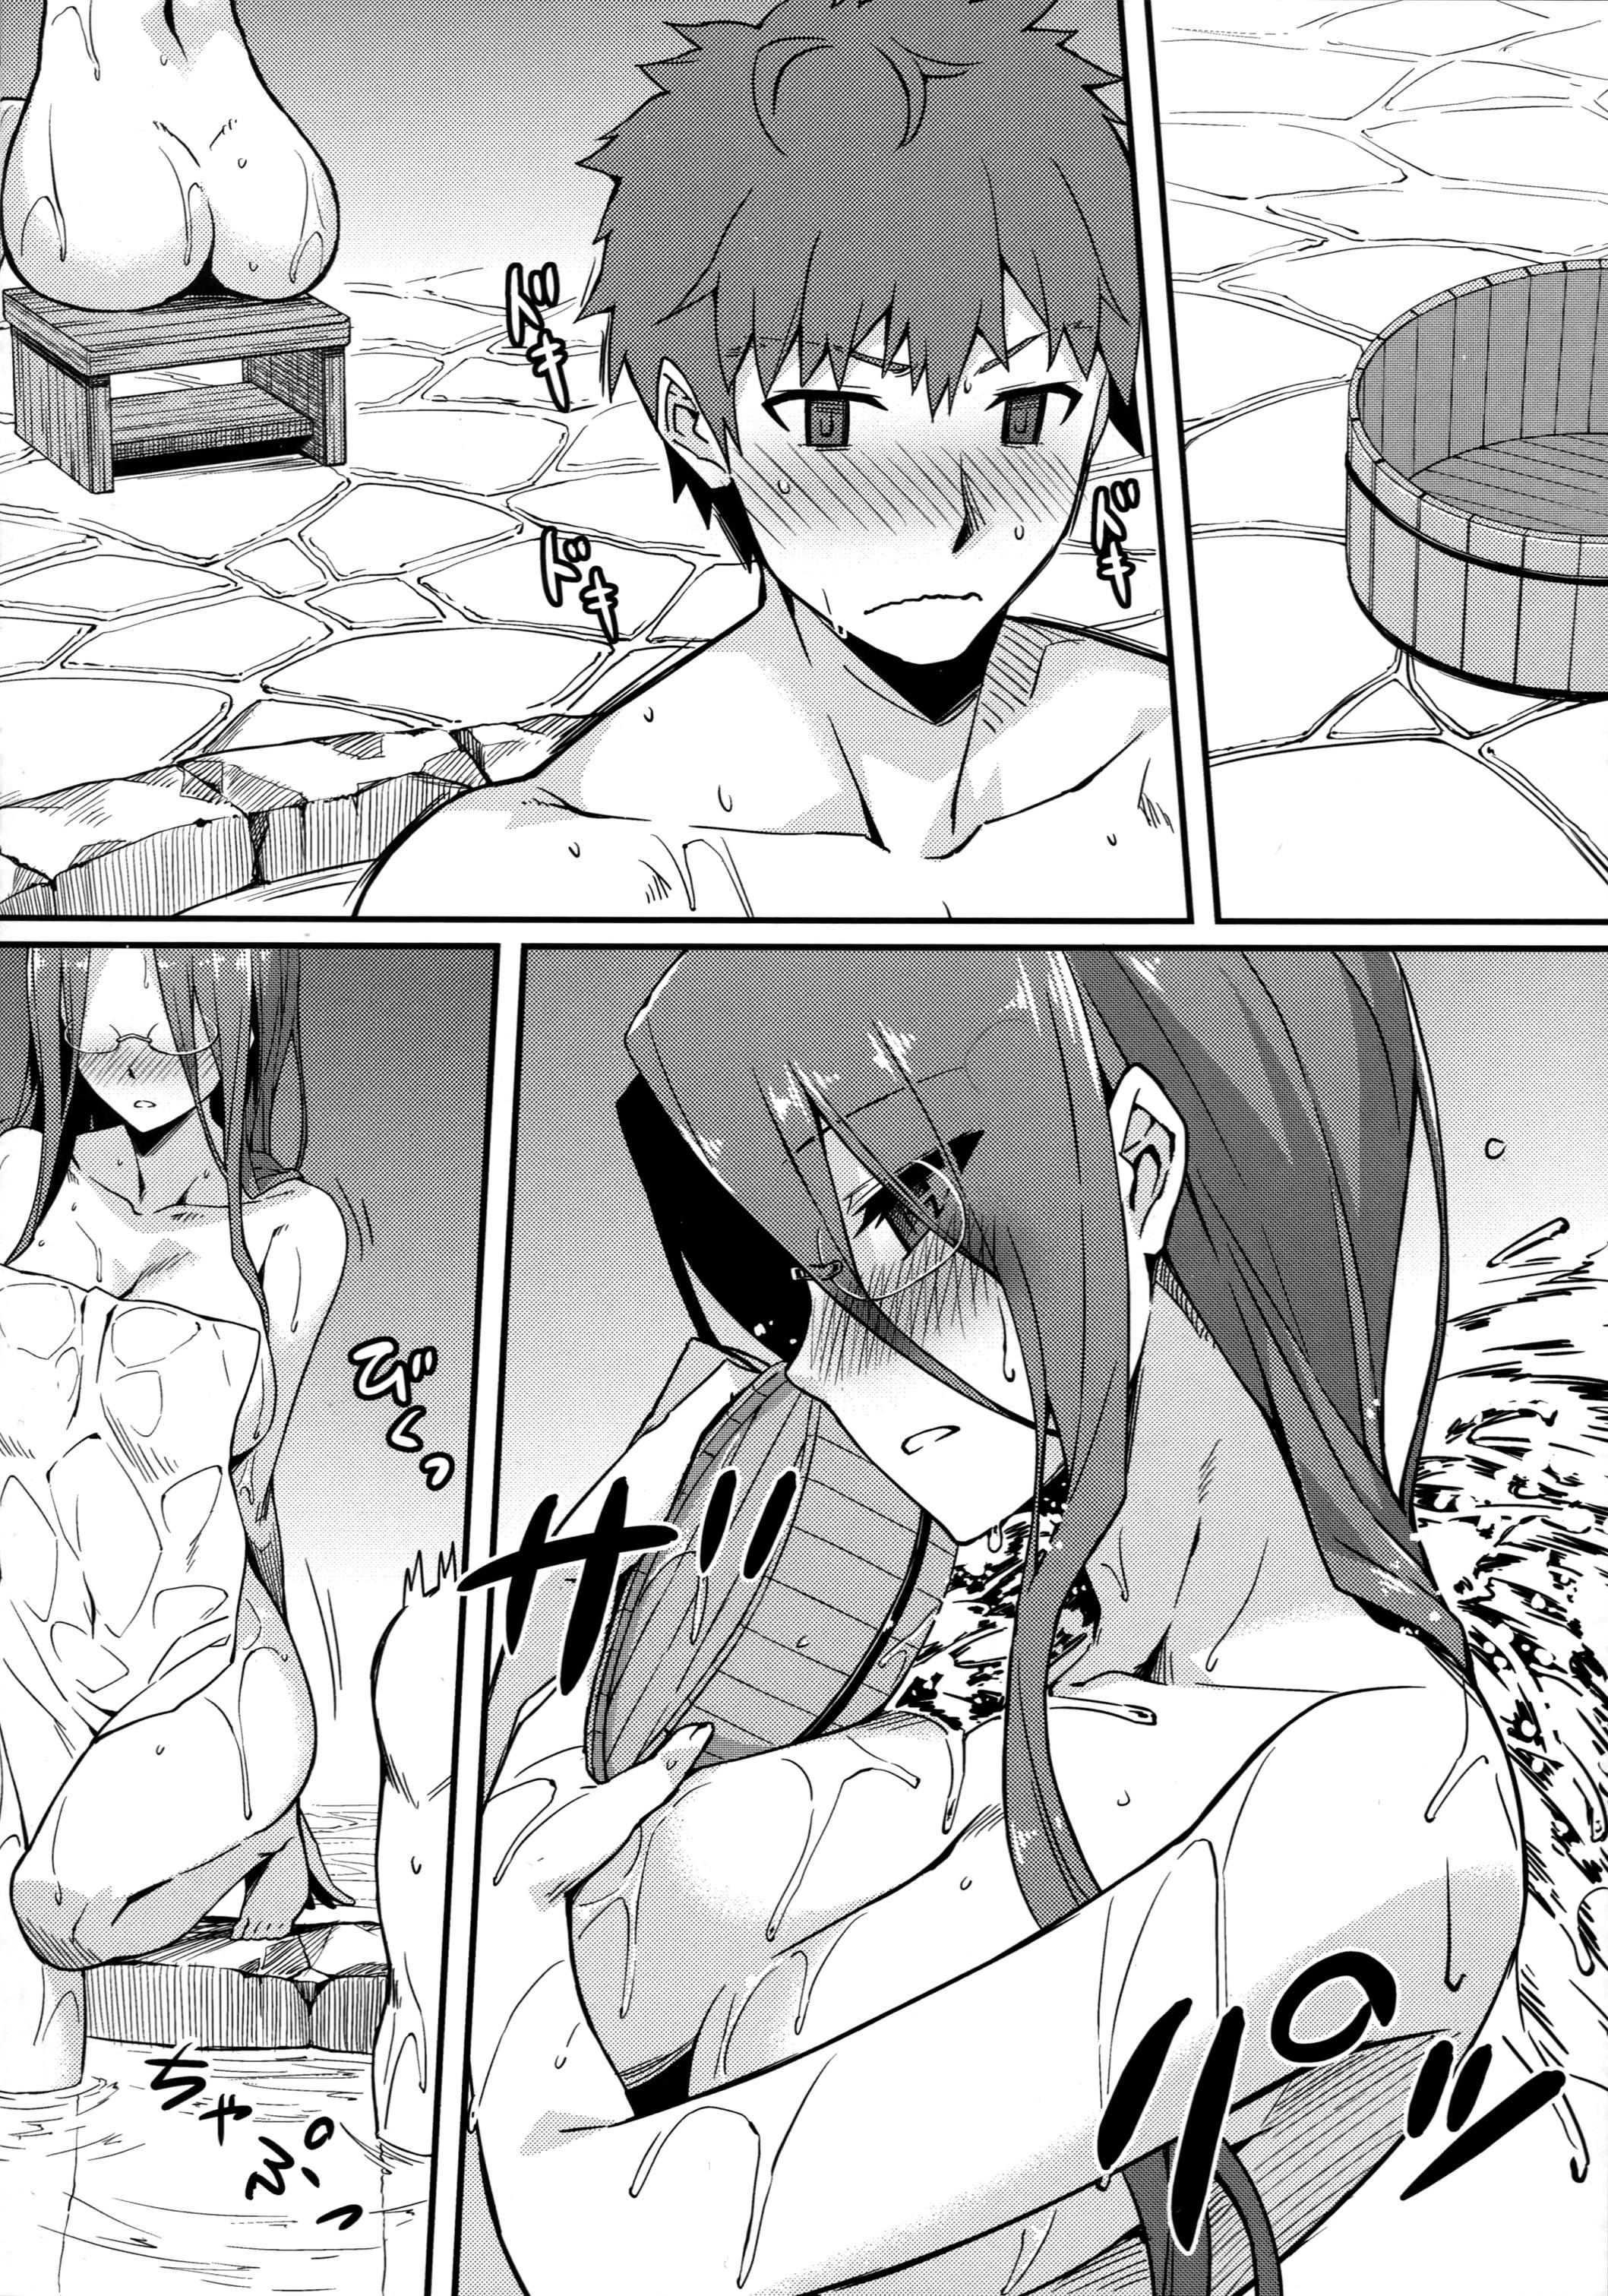 Cams Rider-san to Onsen Yado. - Fate stay night Fate hollow ataraxia Sislovesme - Page 7